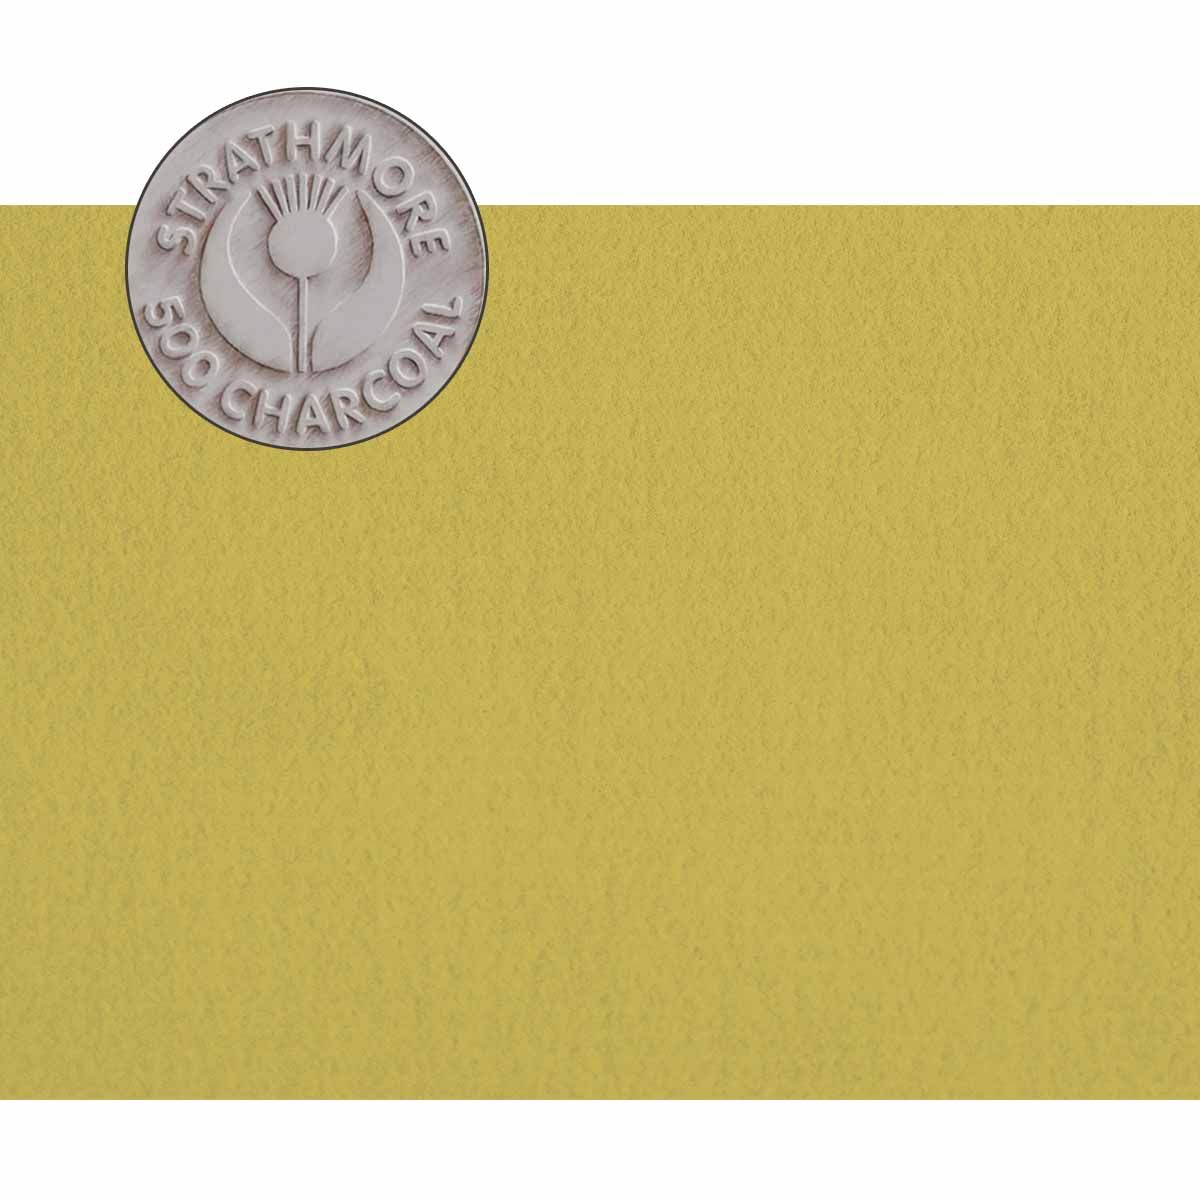 Strathmore 500 Charcoal Paper 19"x25" - #142 Olive, Pack of 25